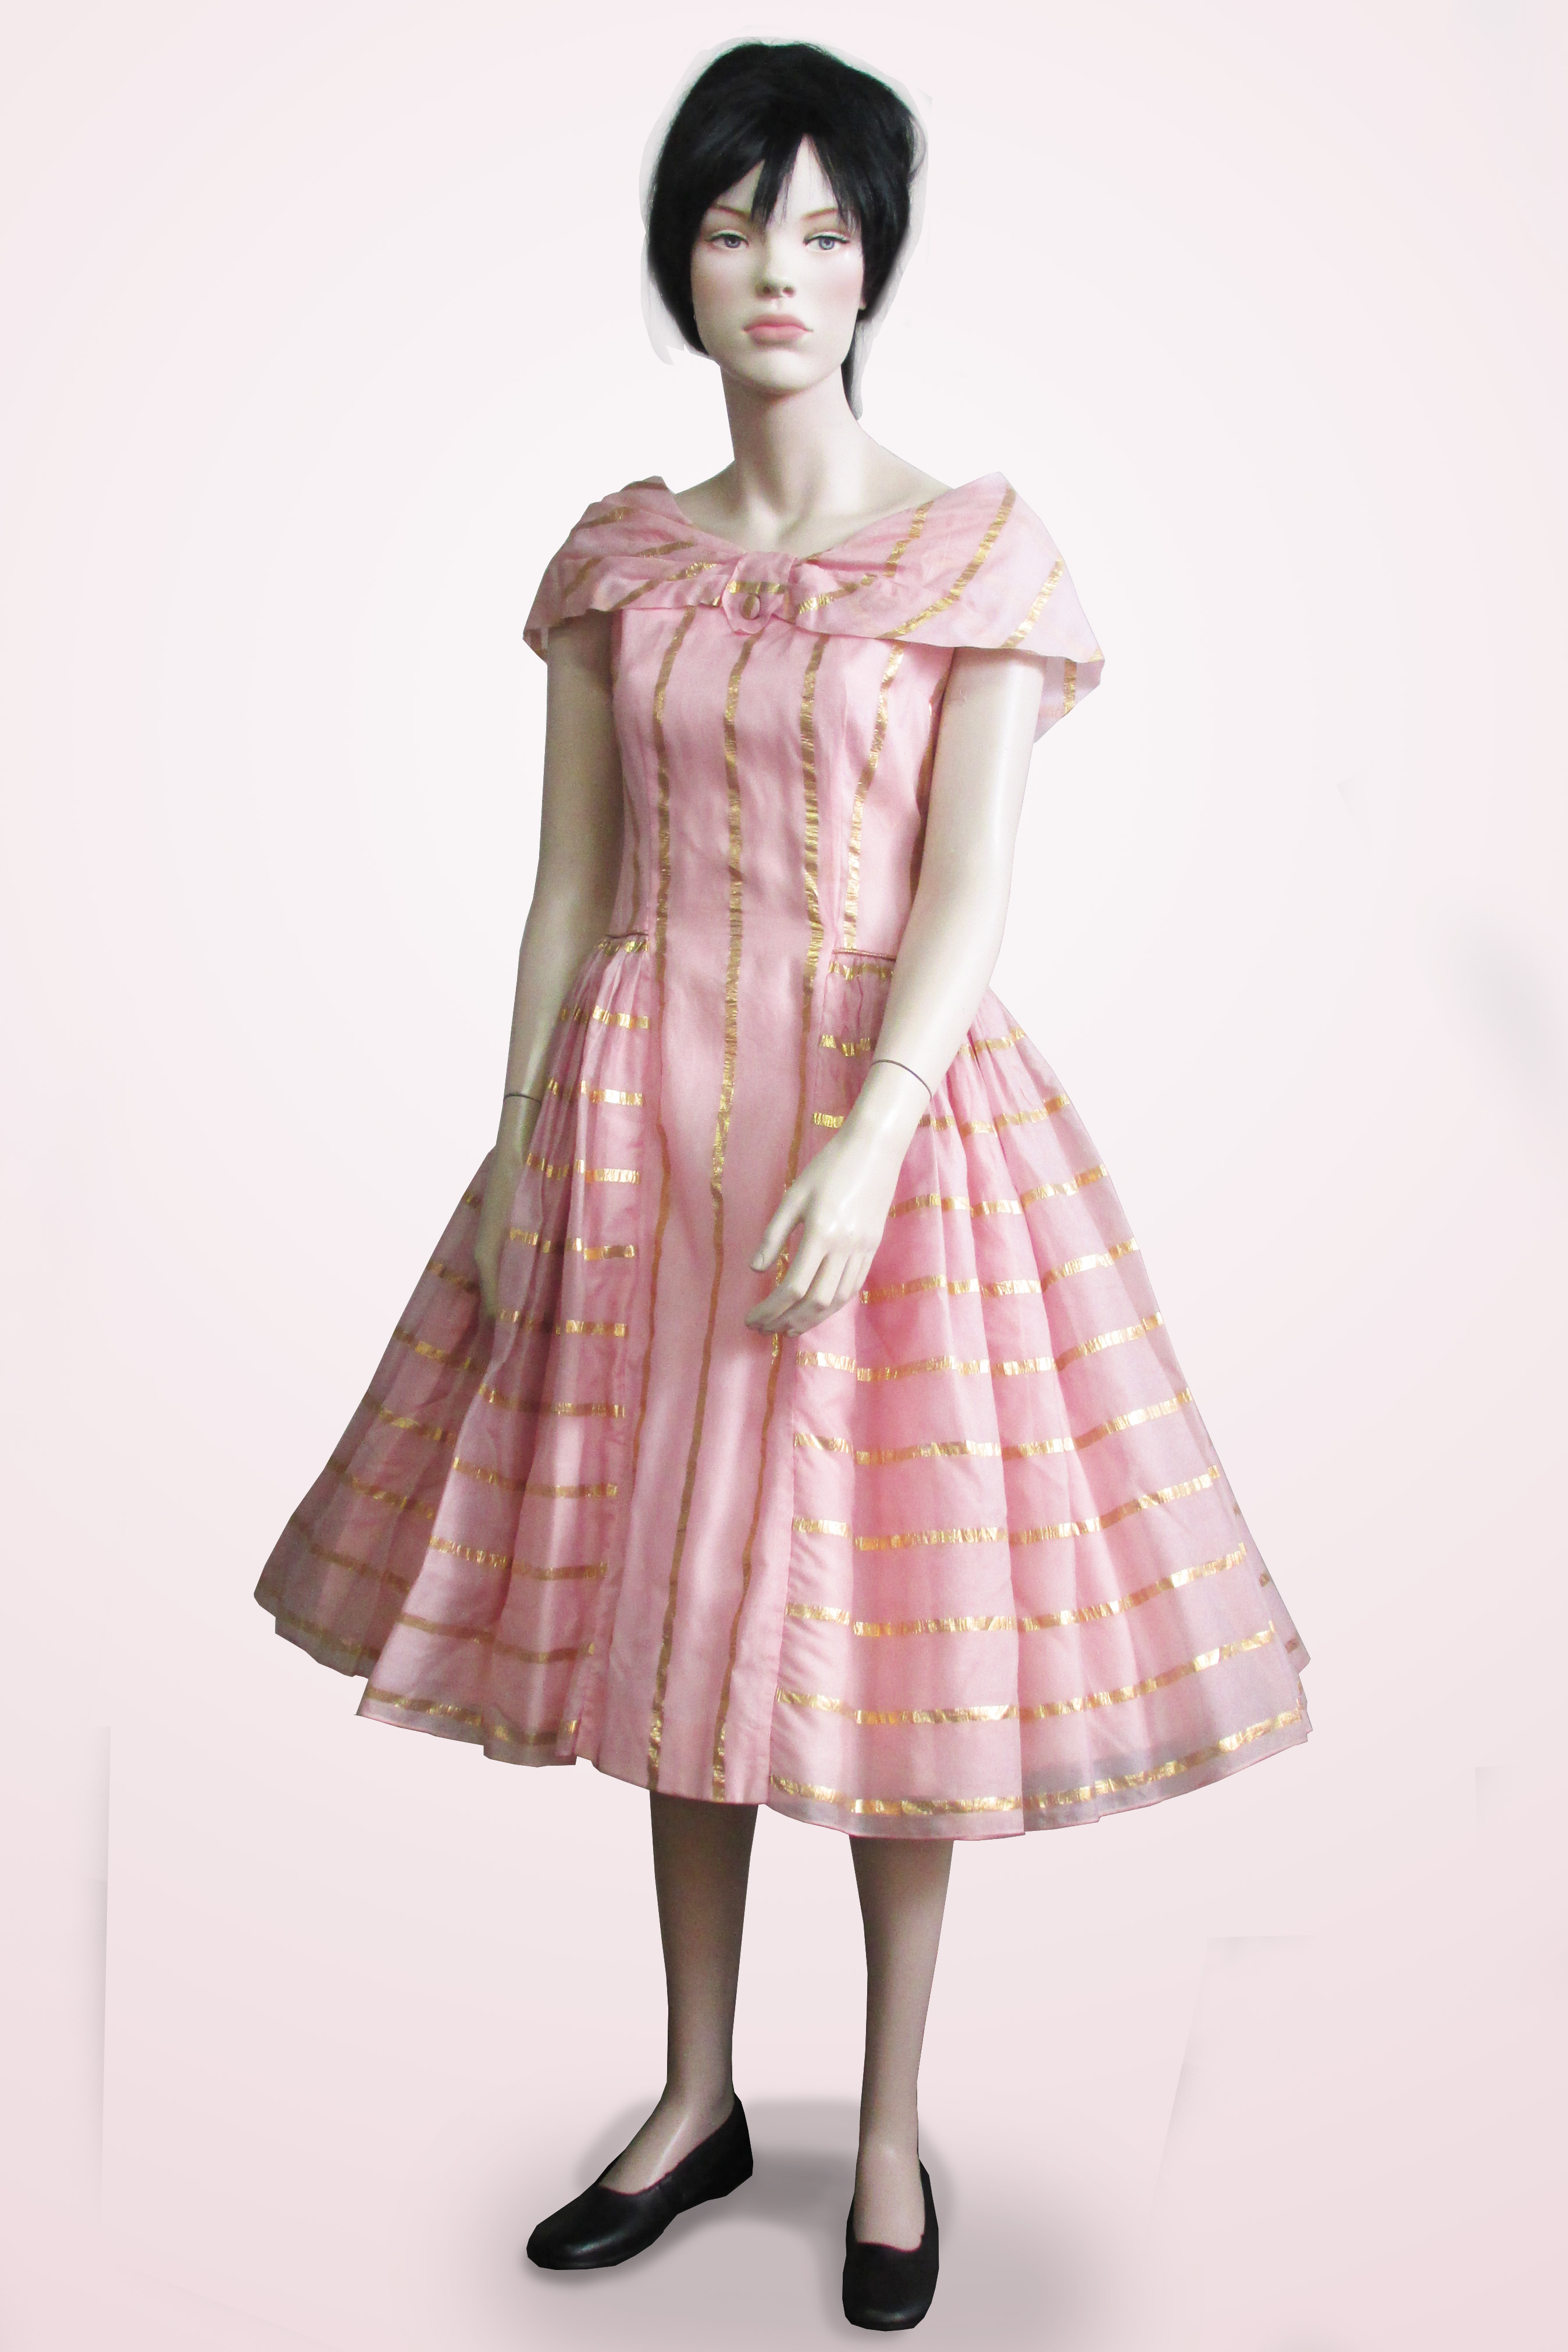 Evening Dress Pale Pink with Gold Stripes 1950s